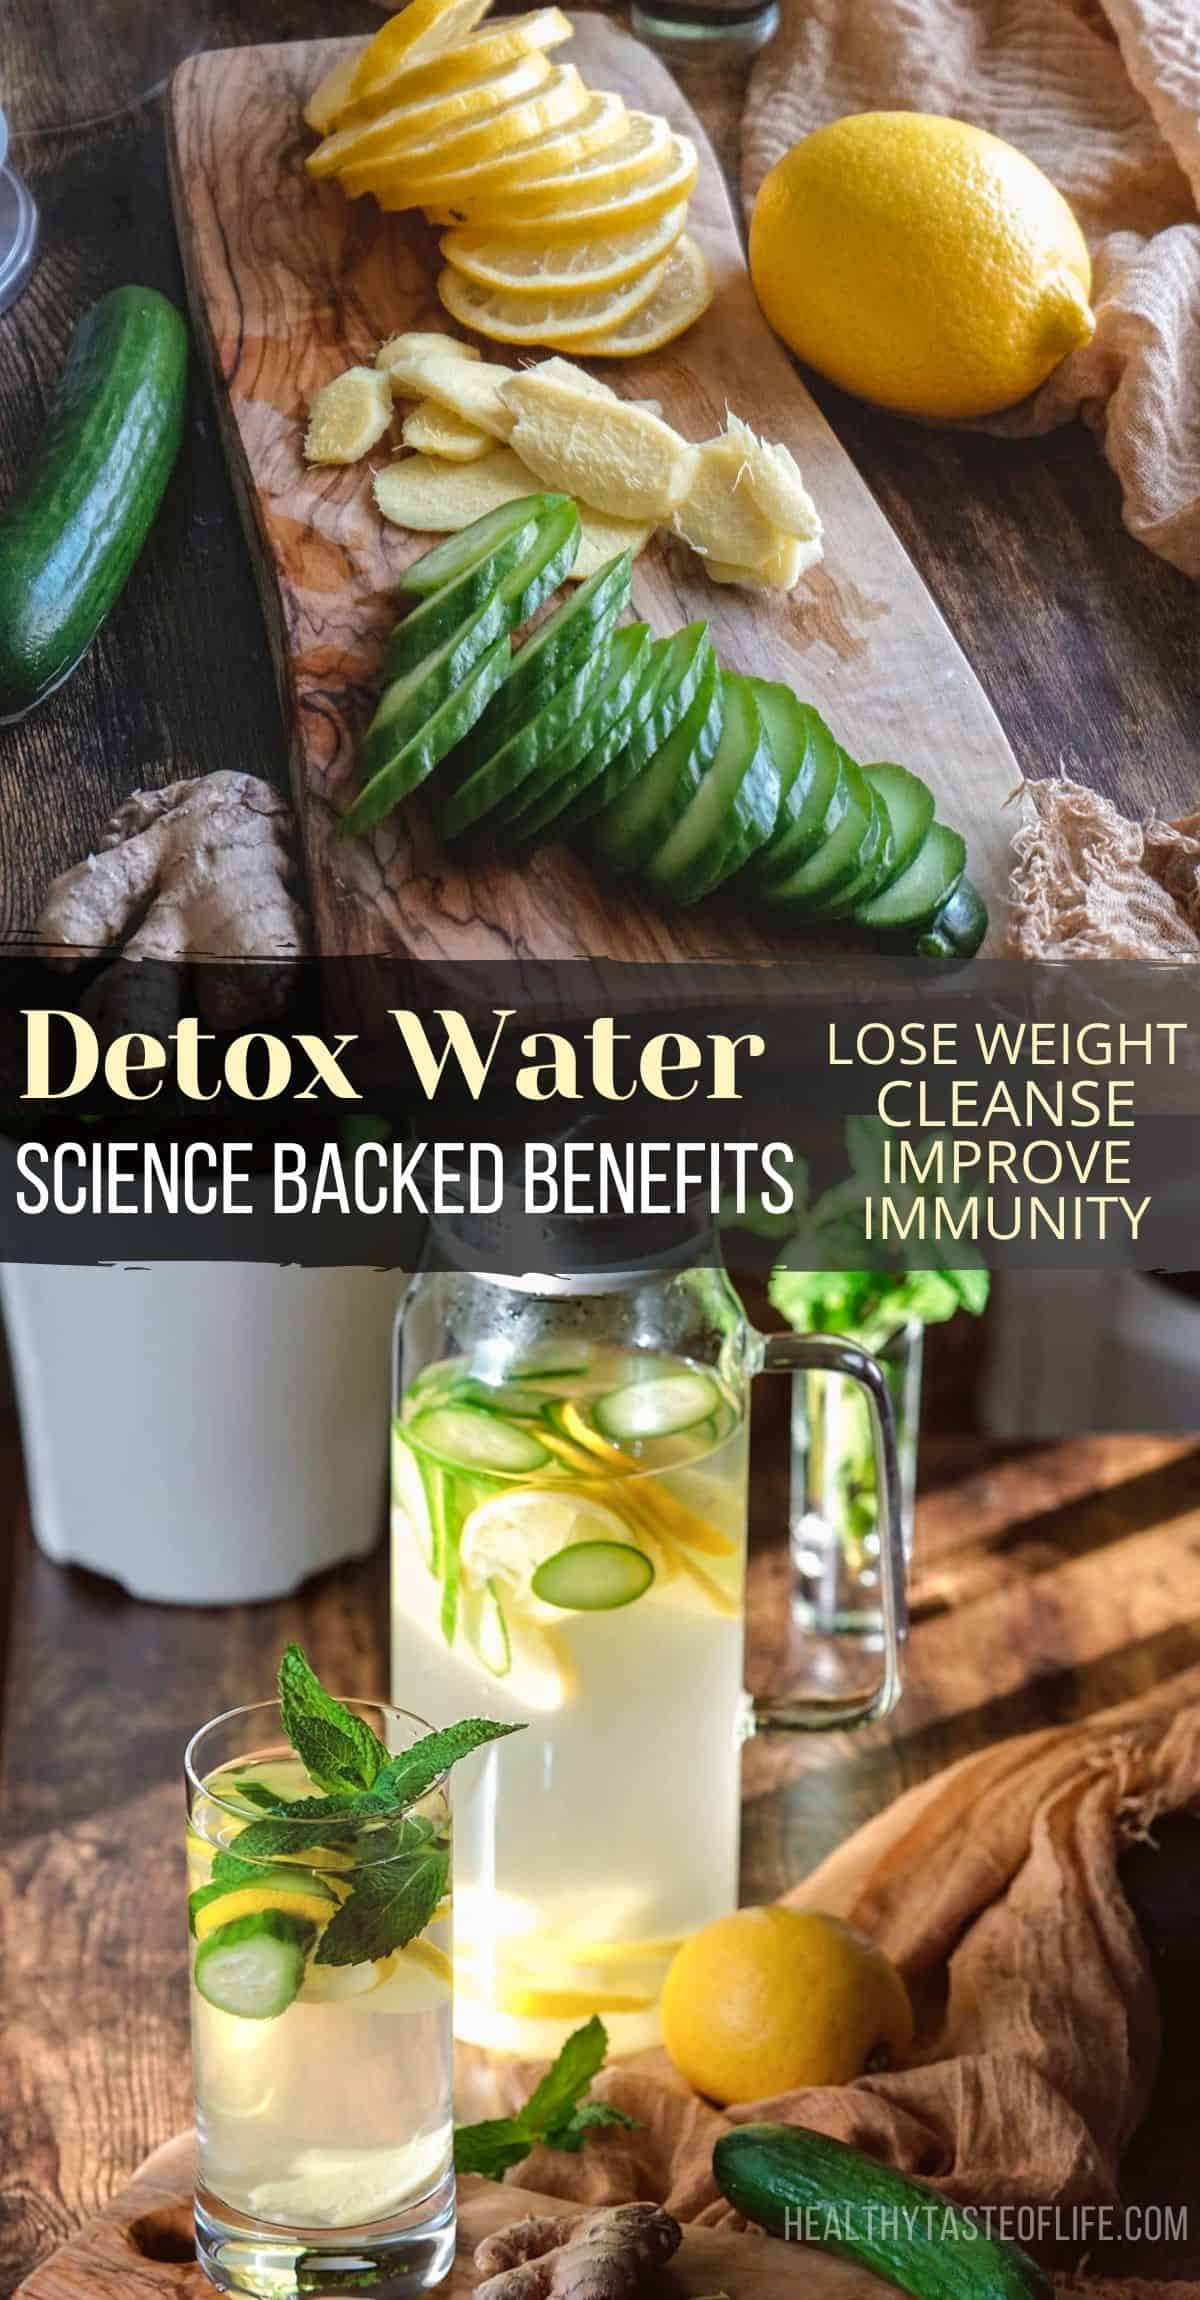 Cucumber lemon ginger water for hydration and detox. This cucumber lemon ginger water is excellent for quenching your thirst in a healthier way plus it promotes hydration, supports weight loss, aids digestion, helps improve your immune system and skin appearance. A healthy detox water with cucumber lemon and ginger to add to your morning routine. #detoxwater #cucumberwater #lemonwater #gingerwater #weightloss #detoxwaterrecipes #ginger #cucumber #lemon #weightloss #healthy